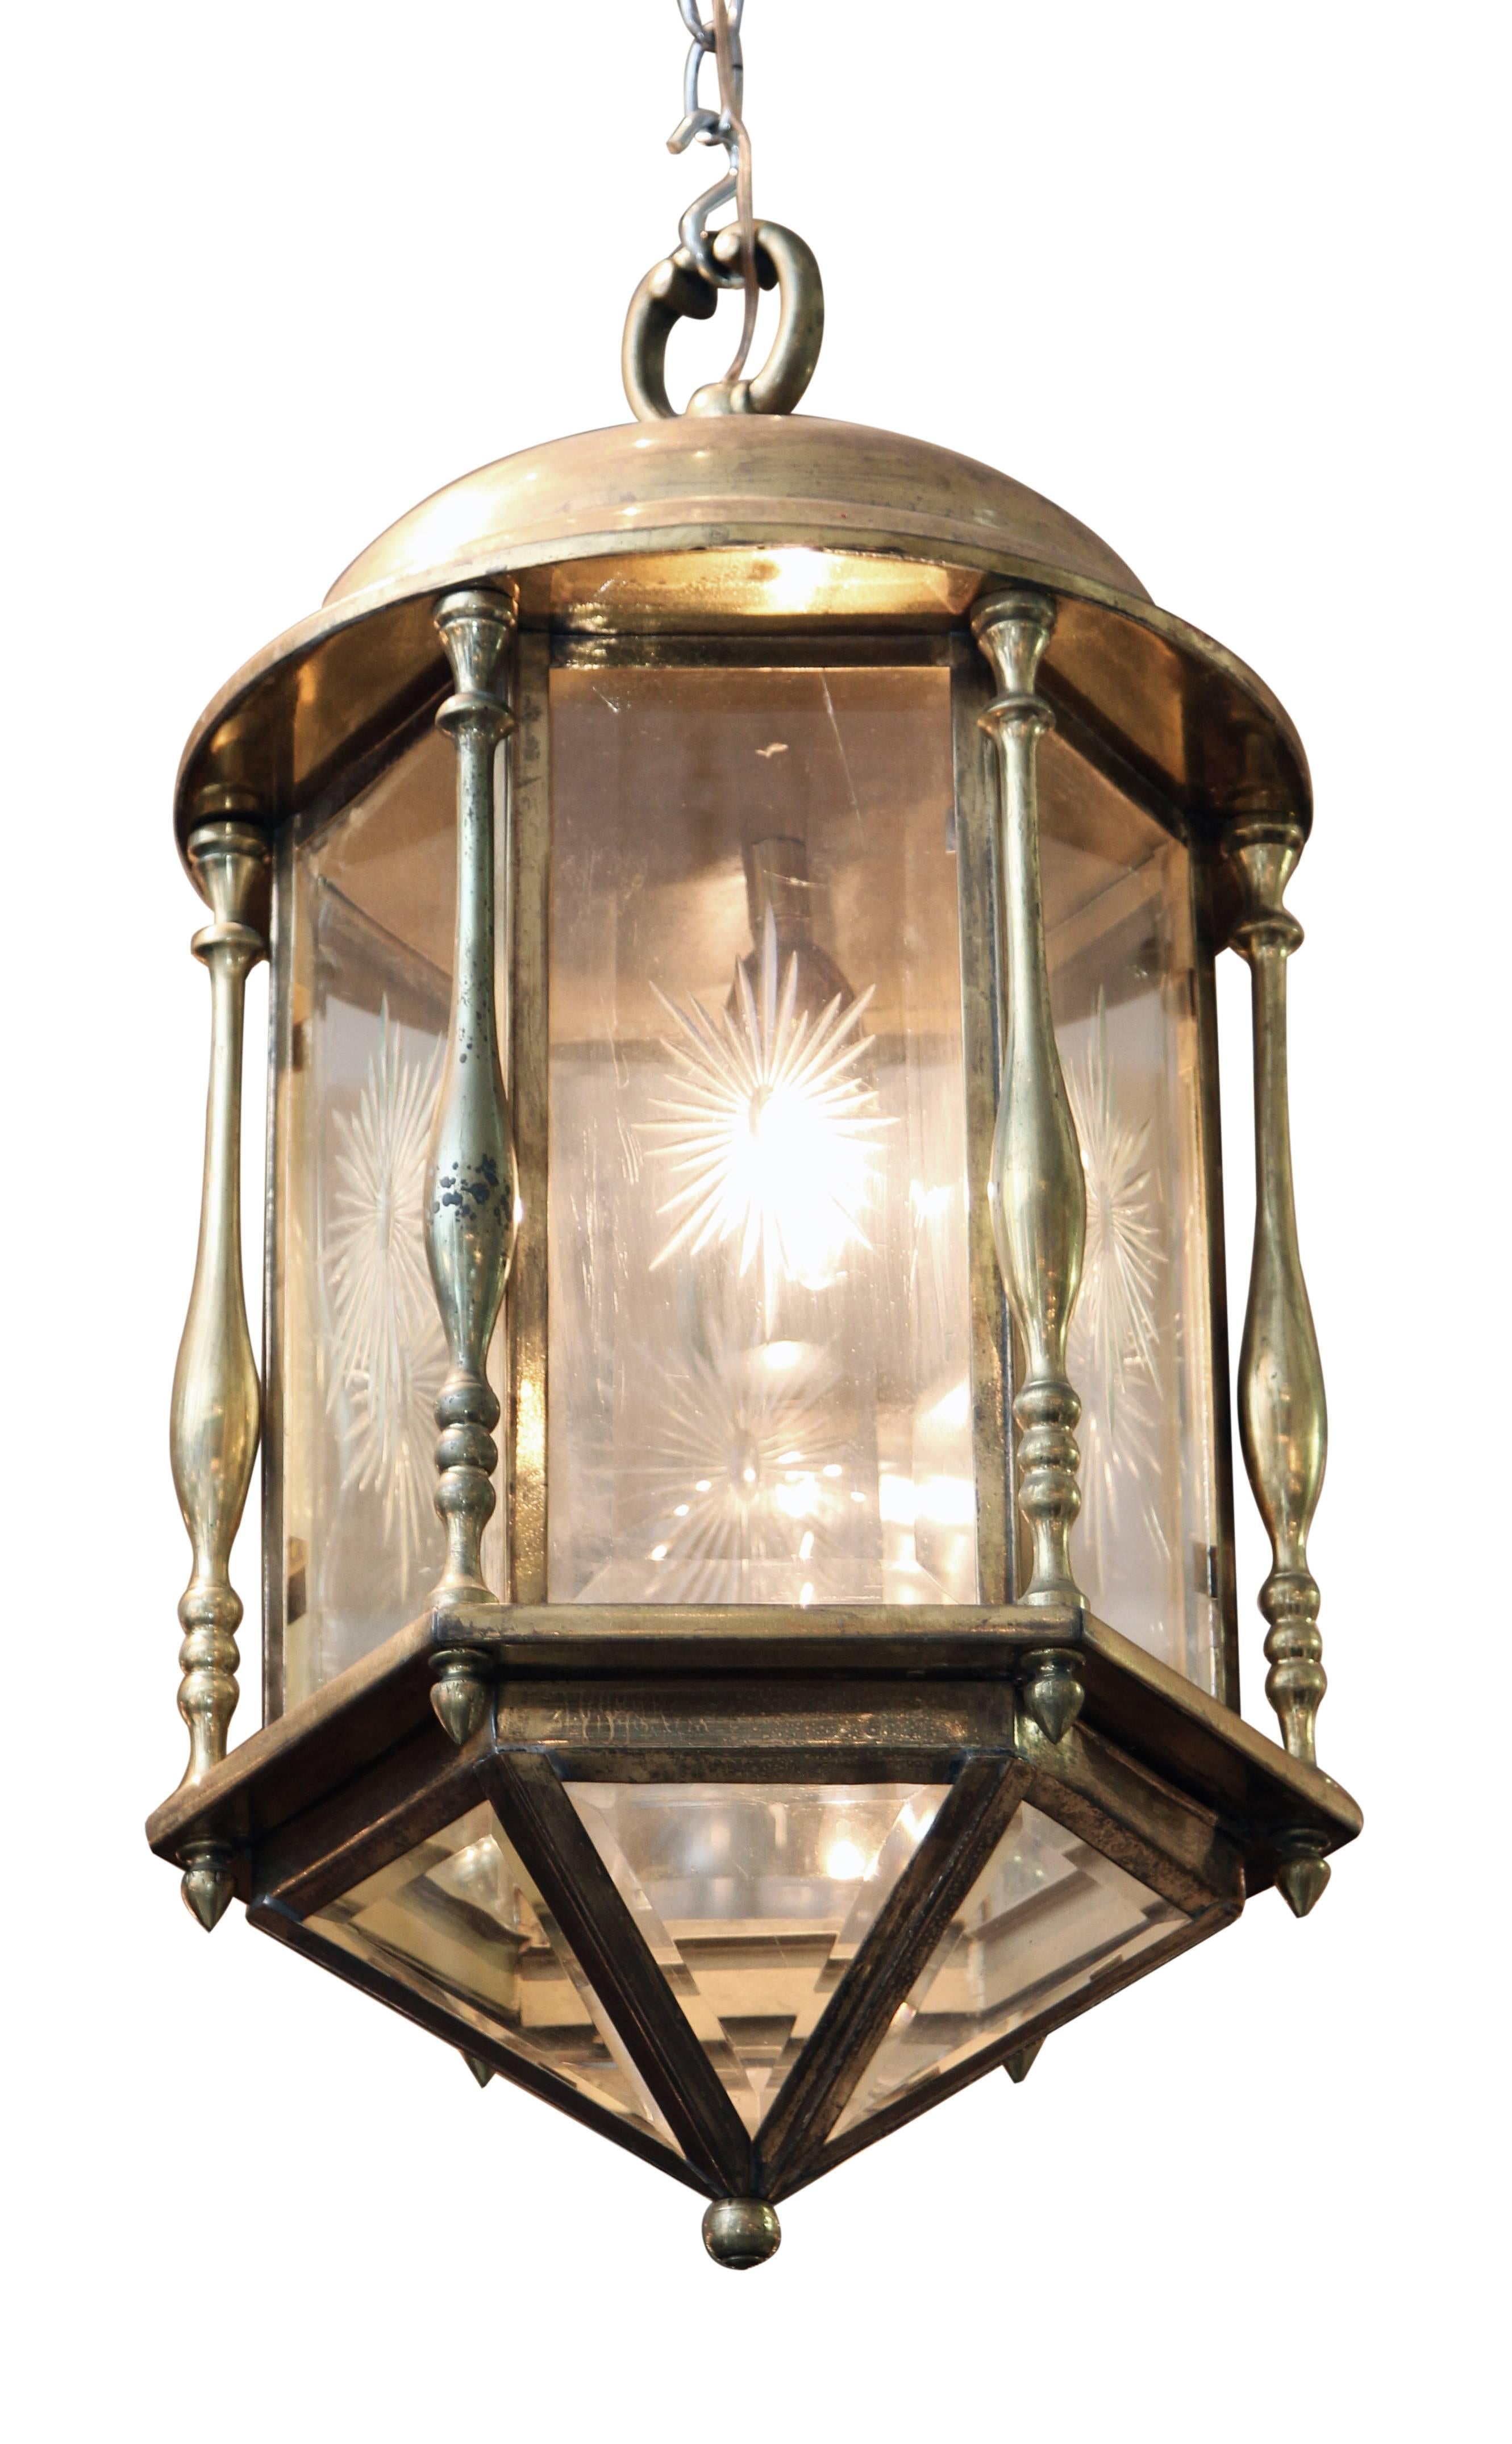 1950s brass etched lantern with beveled glass. This can be seen at our 5 East 16th St location on Union Square in Manhattan.